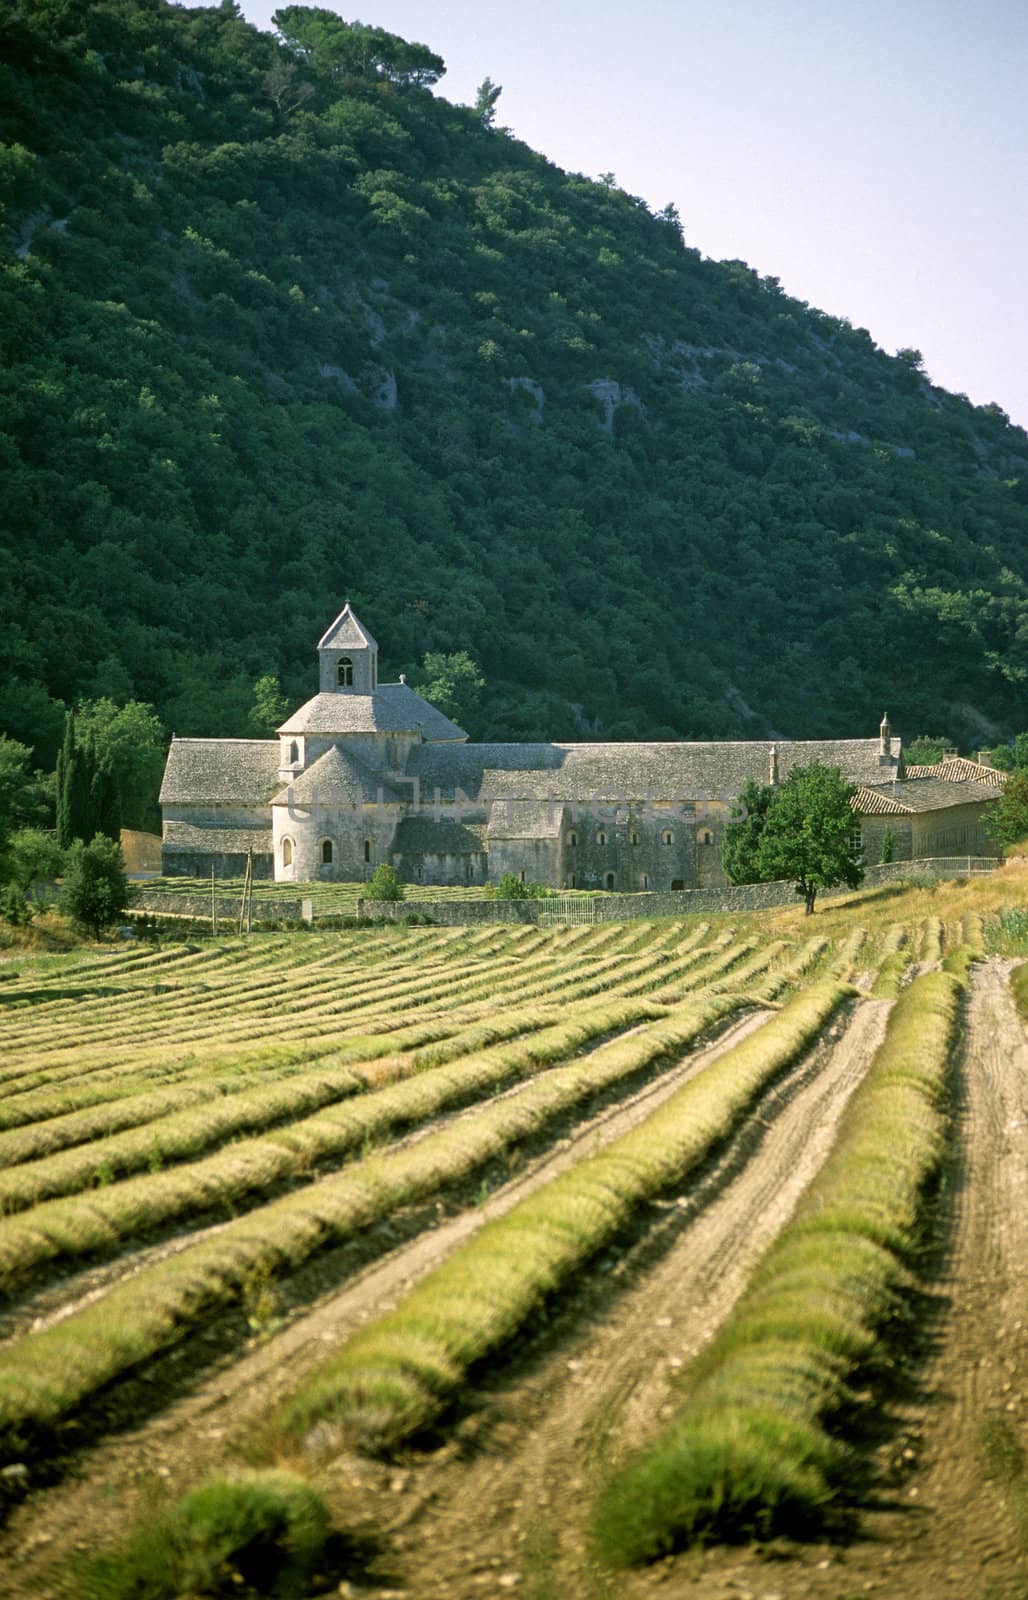 The acient french abbey, Abbaye de Senanque sits among the mountains and lavender fields. 